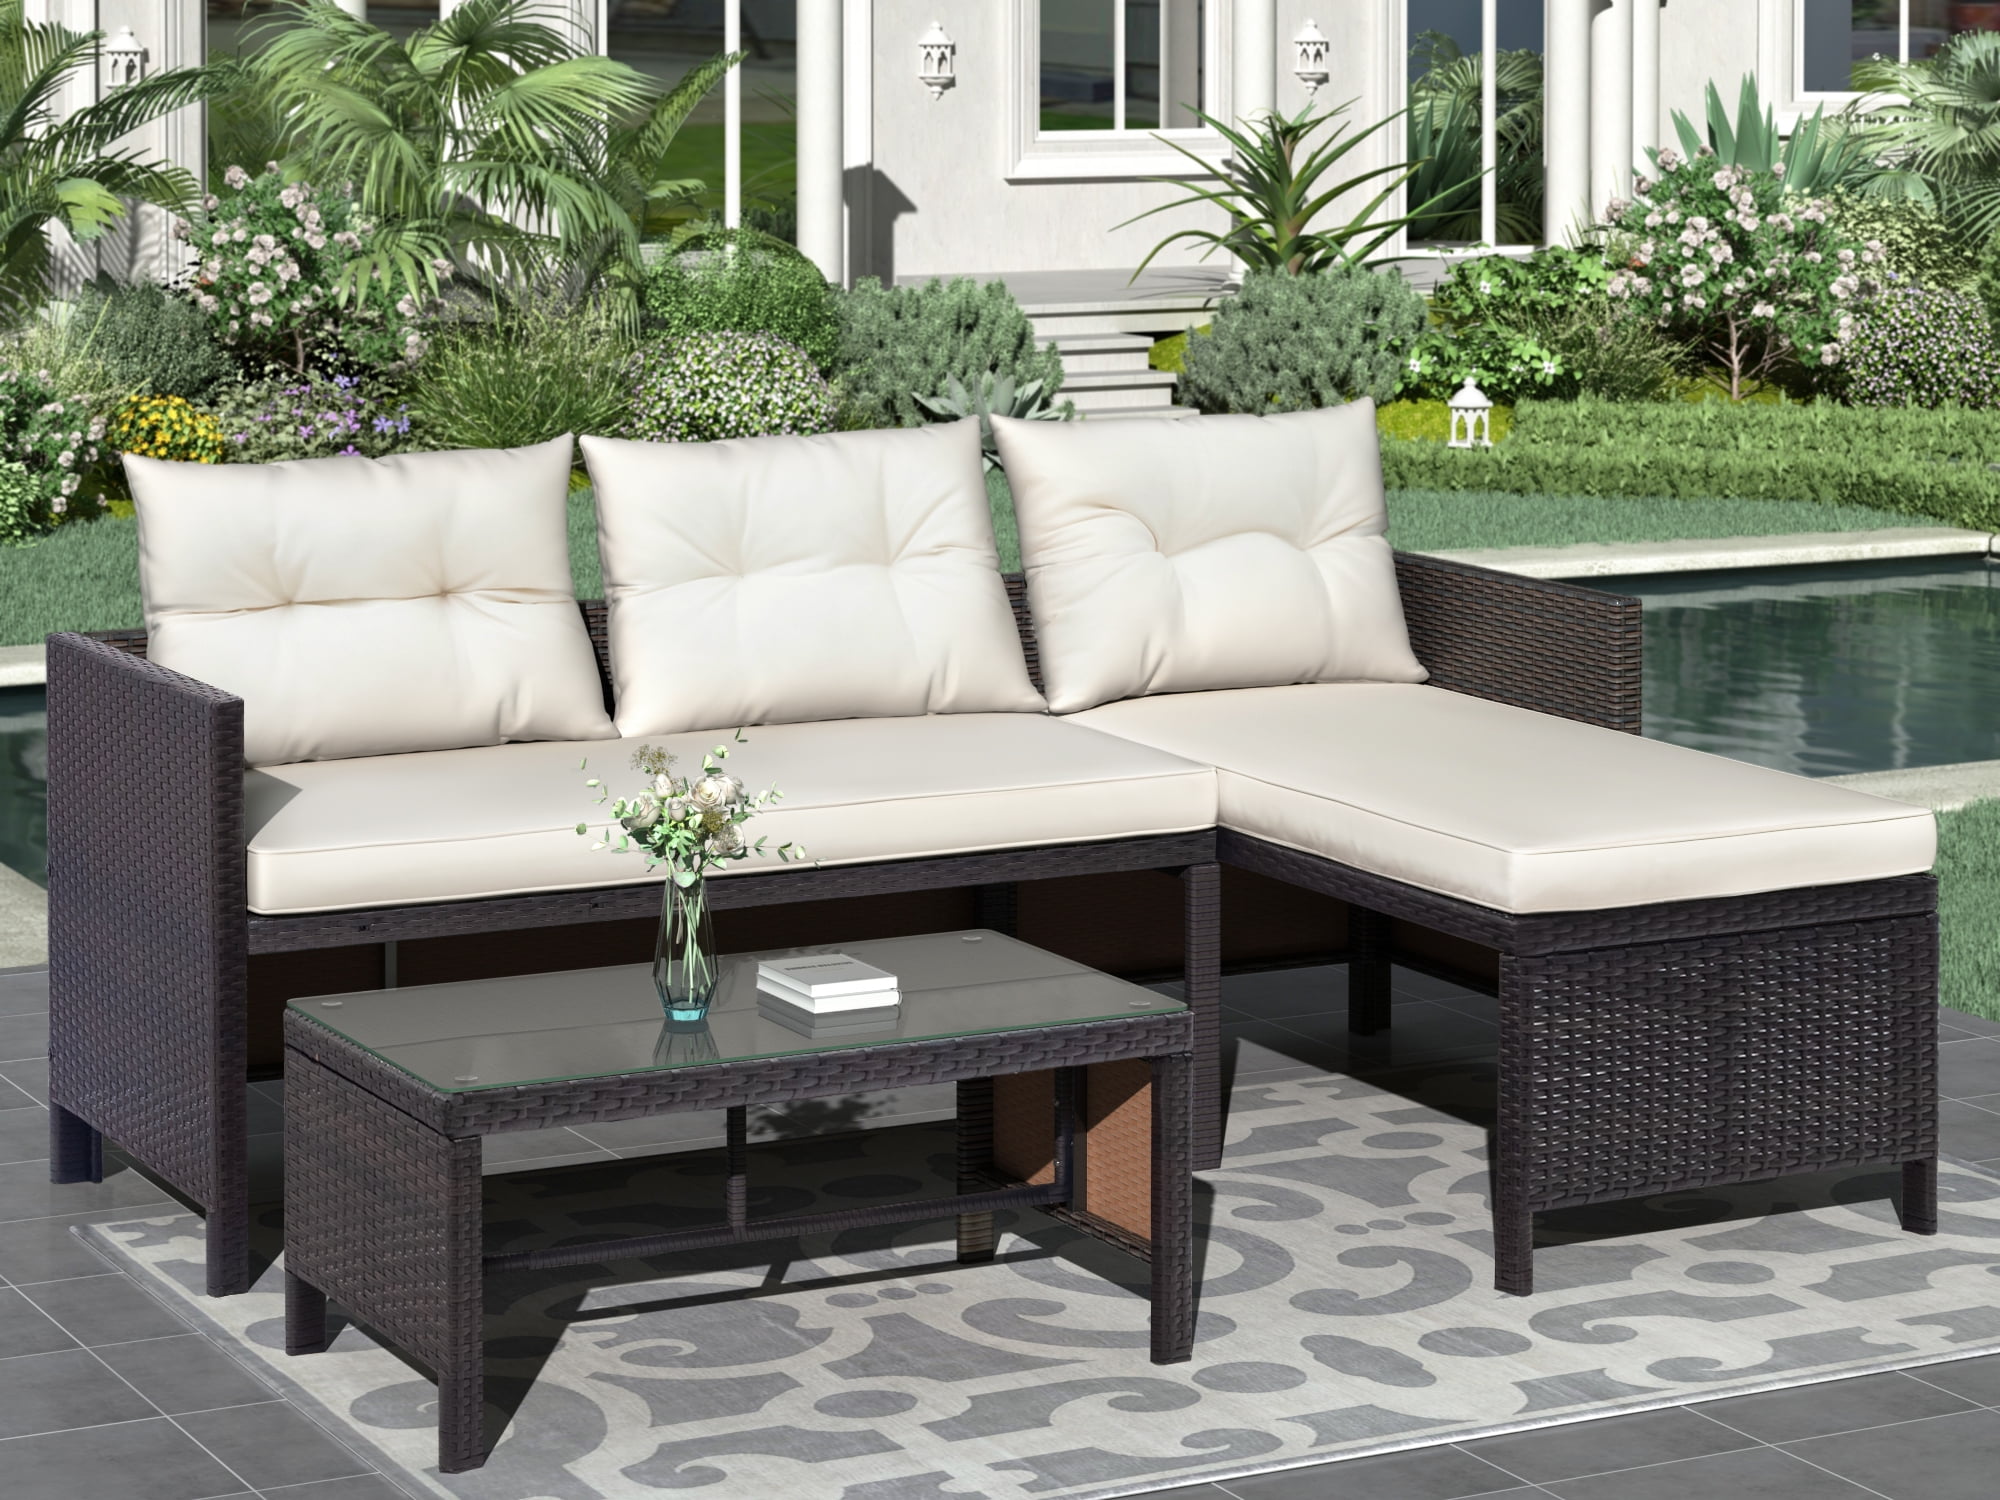 Clearance! 3 Pieces Patio Furniture Sectional Set, Outdoor Furniture Set with Two-Seater Sofa, Lounge Sofa, Table &amp; Cushion, PE Rattan Wicker Bistro Set, Conversation Set for Garden, Backyard, B635